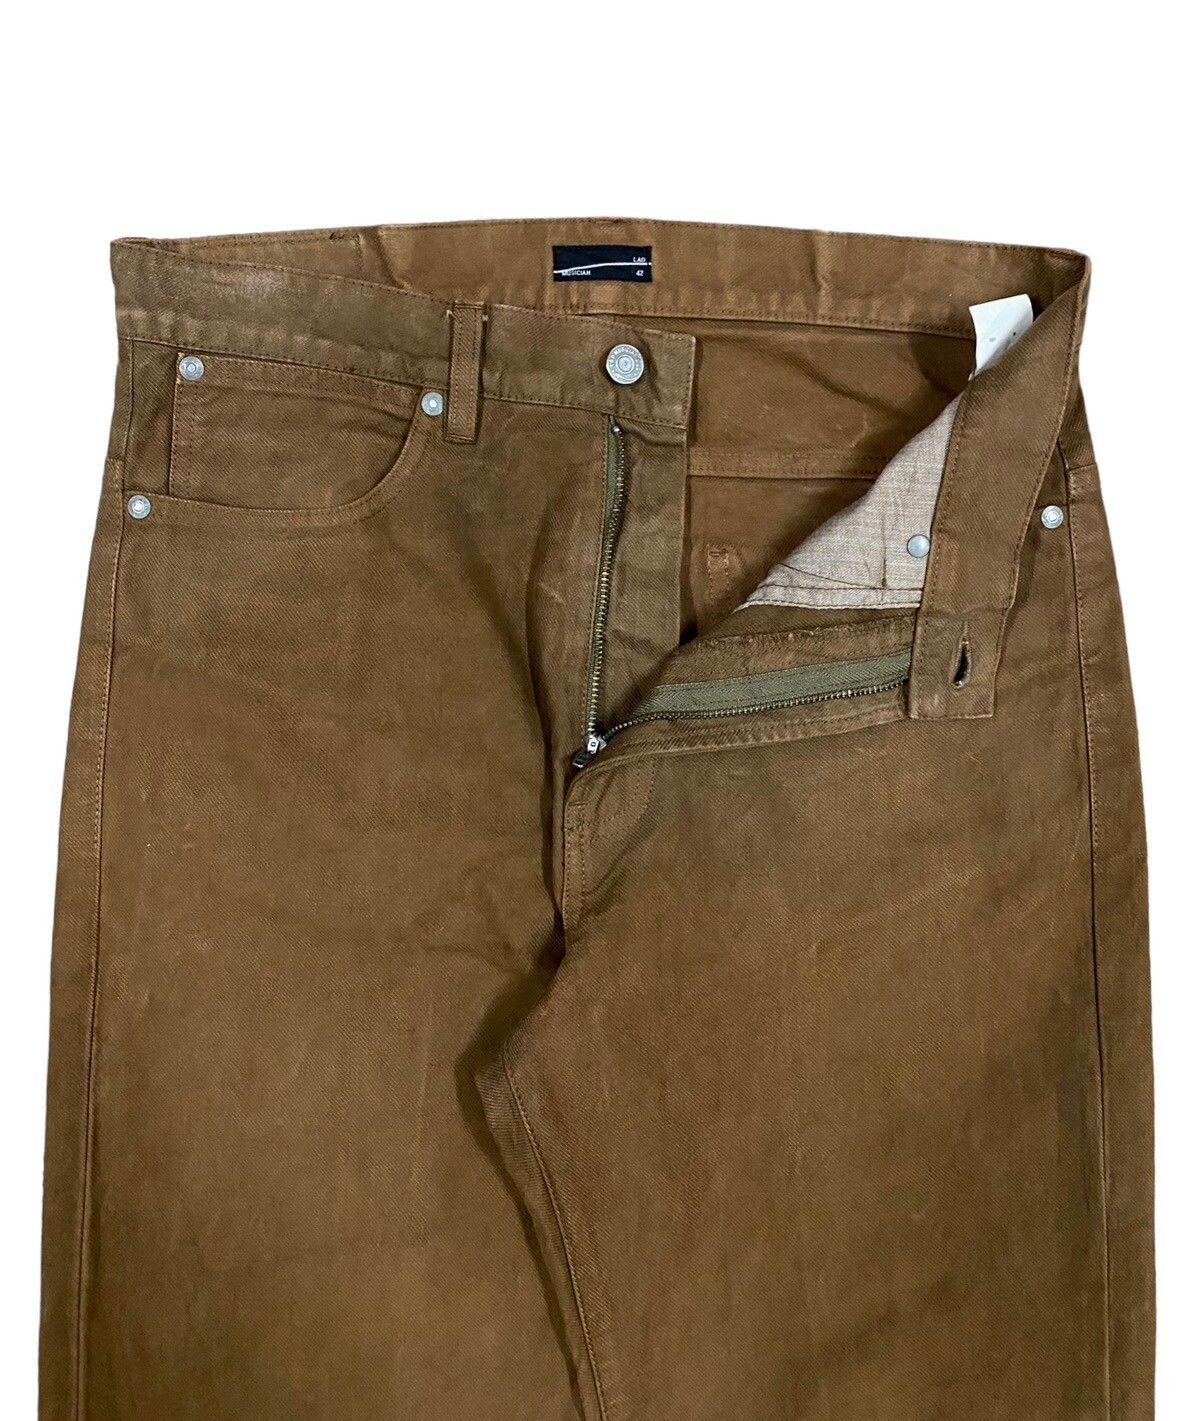 Lad Musician Brown Straight Cup Jeans Made In Japan - 11